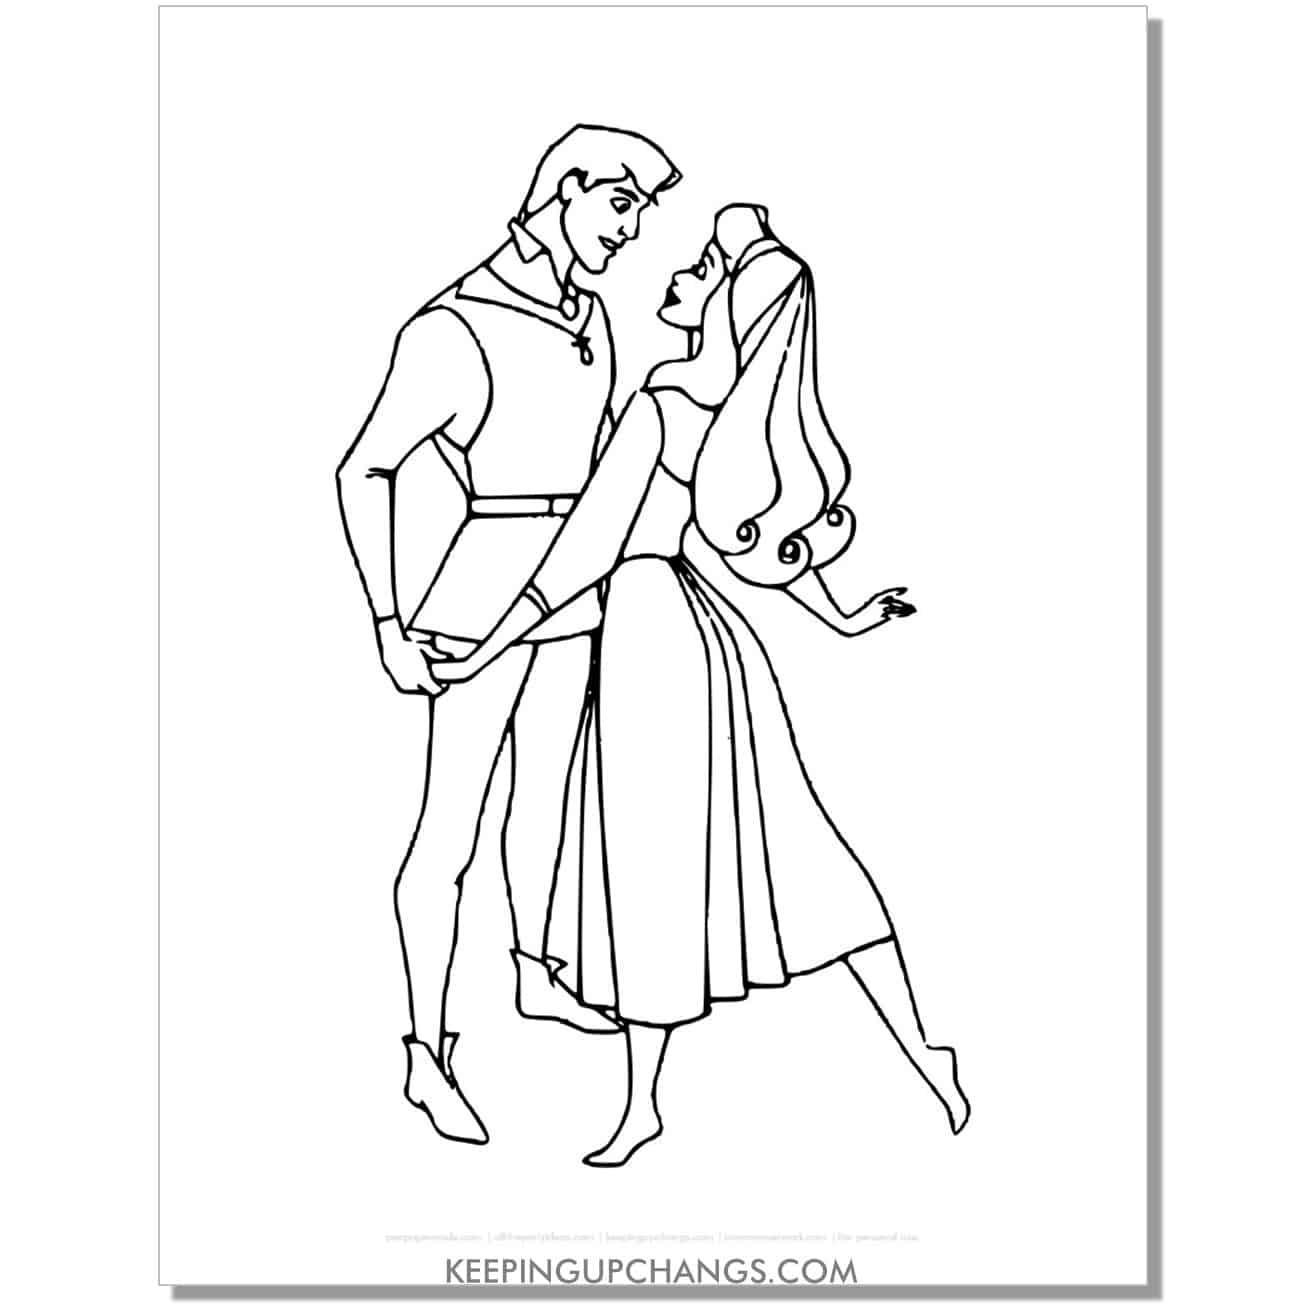 free aurora briar rose with prince coloring page, sheet.